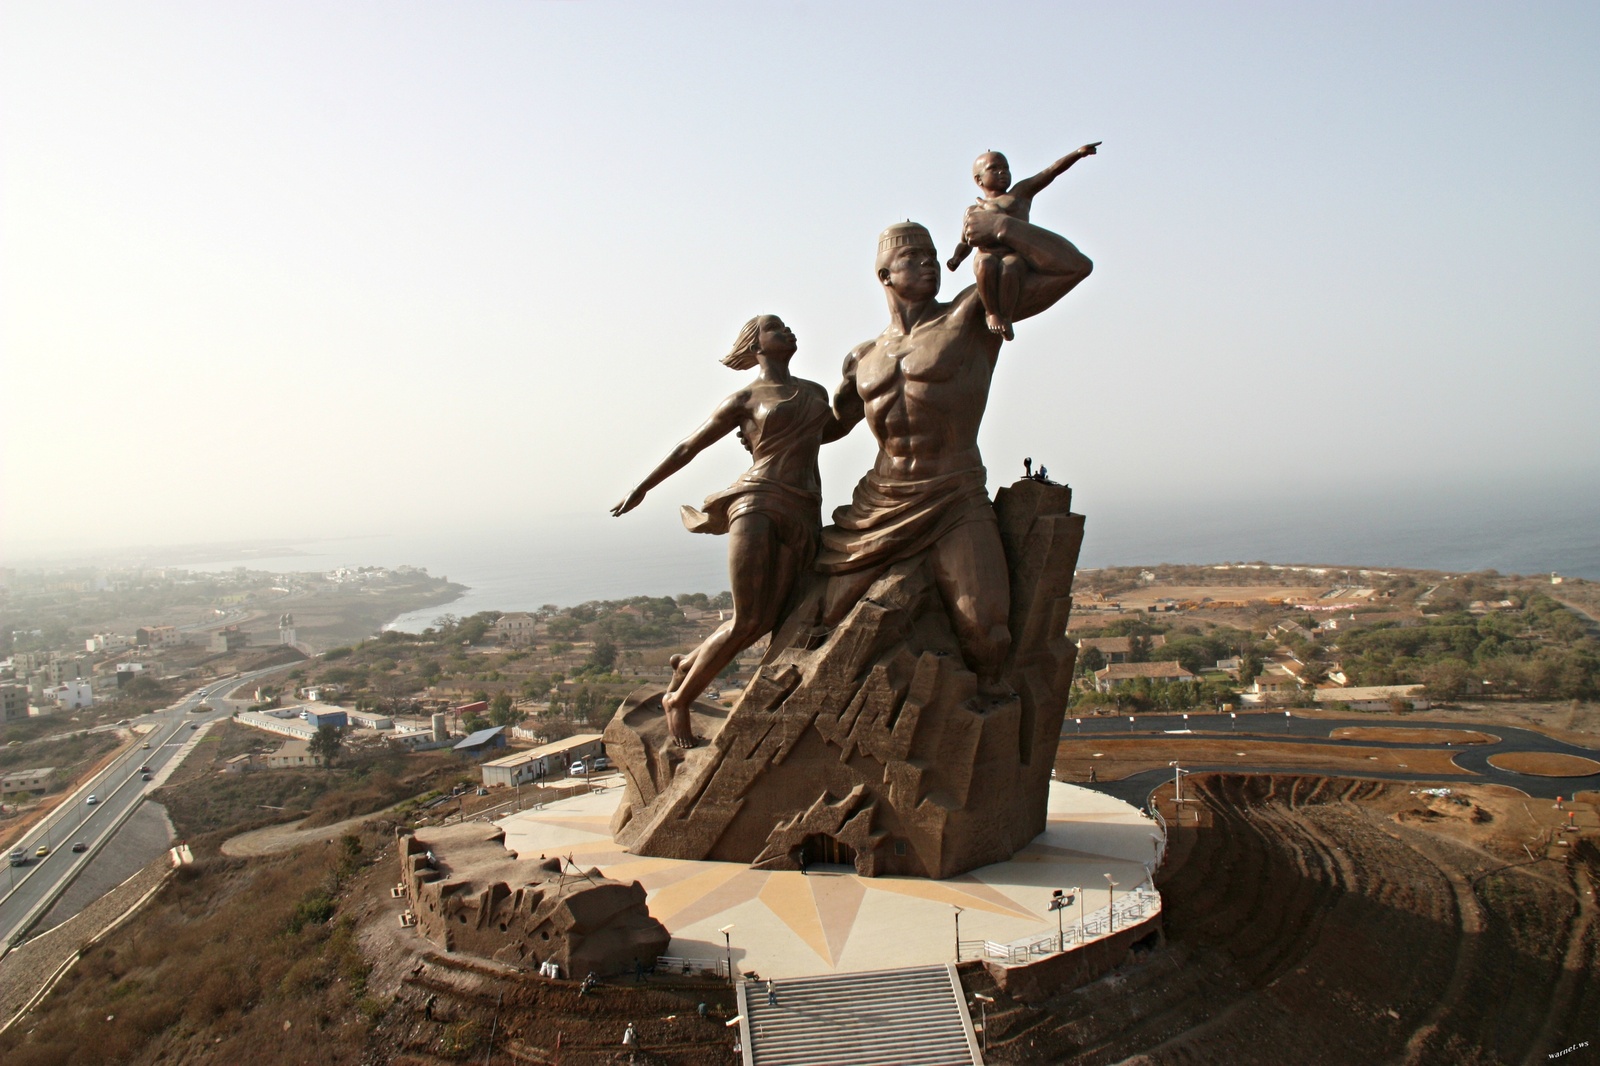 Image: Public monument celebrating the fiftieth anniversary of Senegal’s independence from France 2010, copper and bronze, Dakar, Senegal.